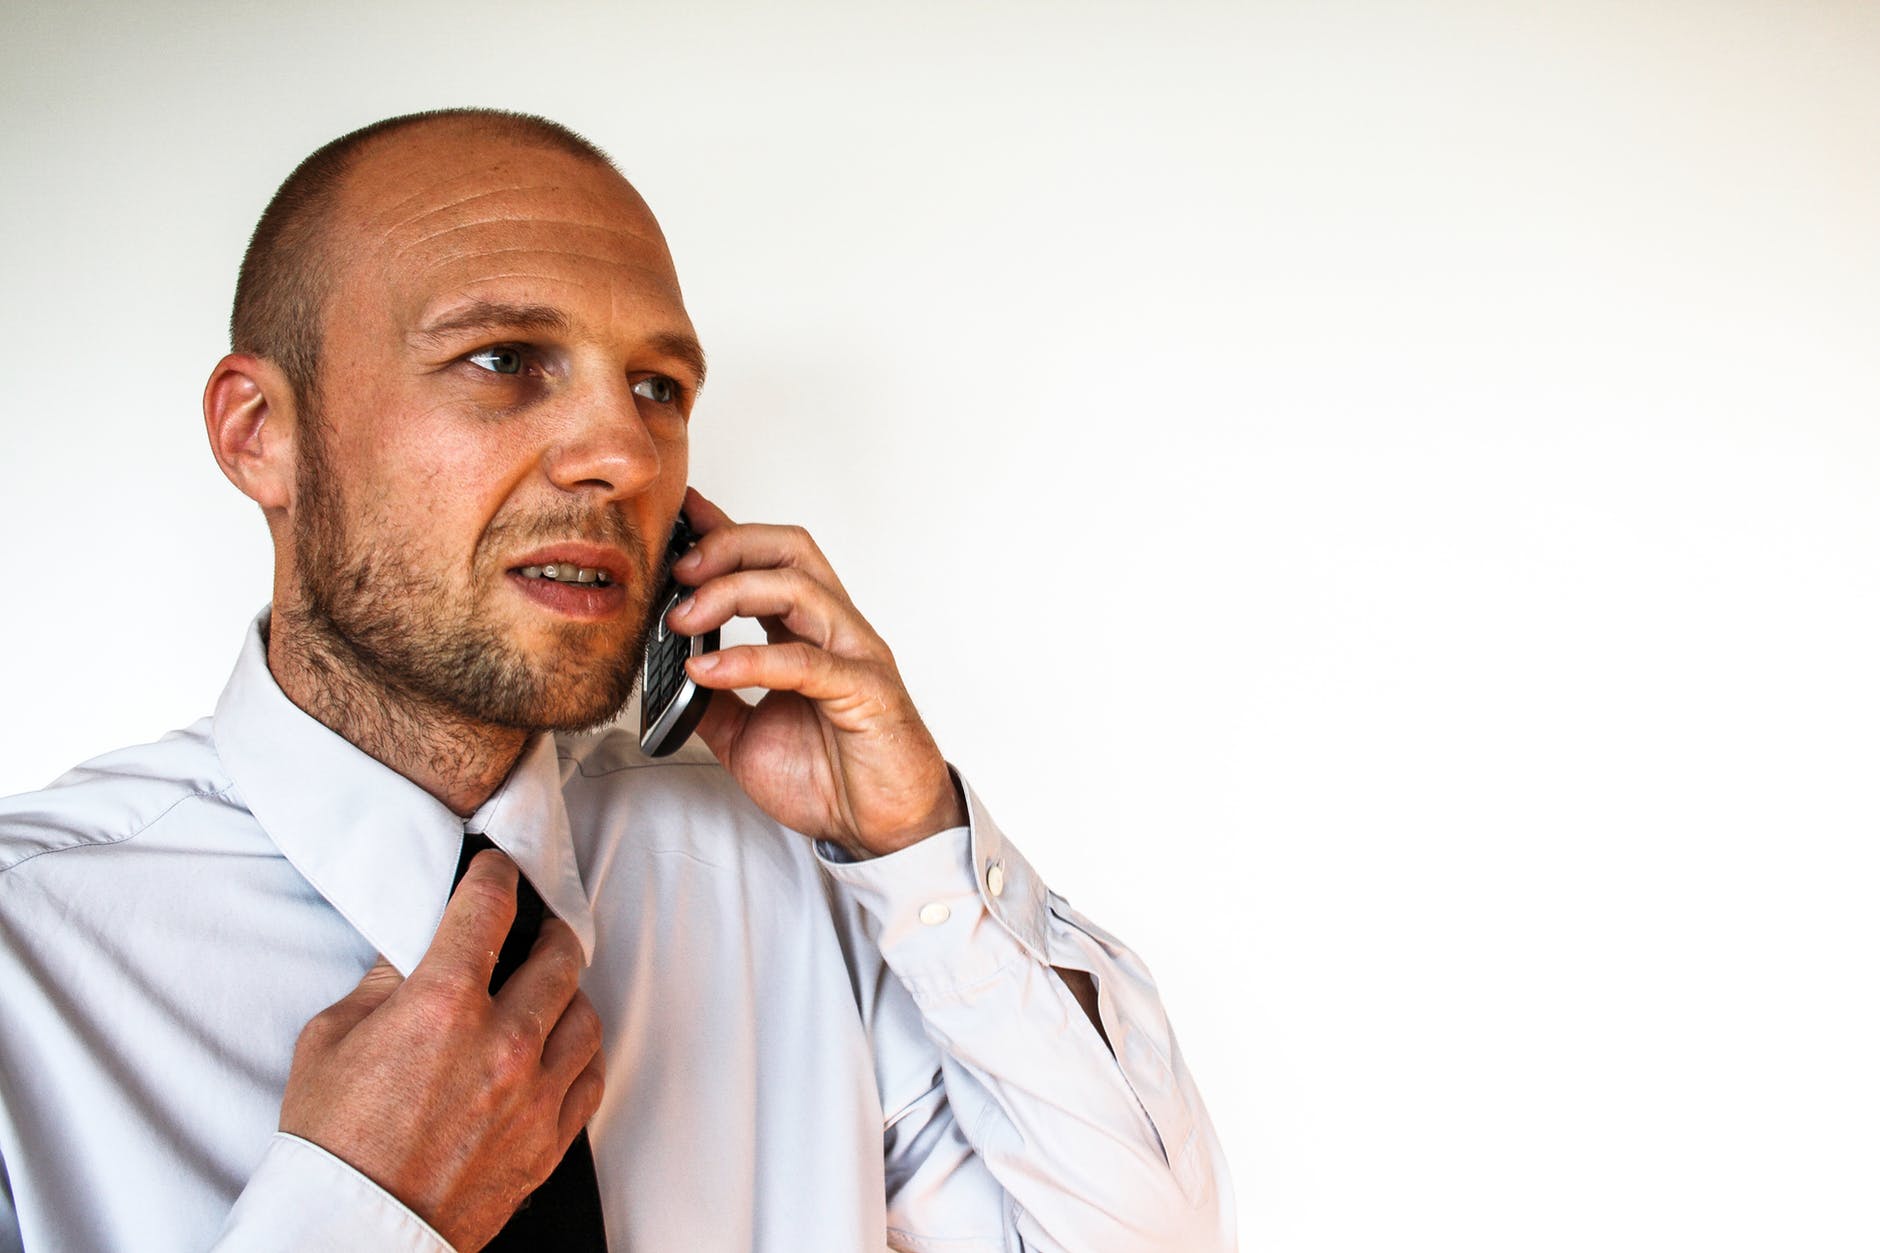 Man having a difficult call about financial marketing